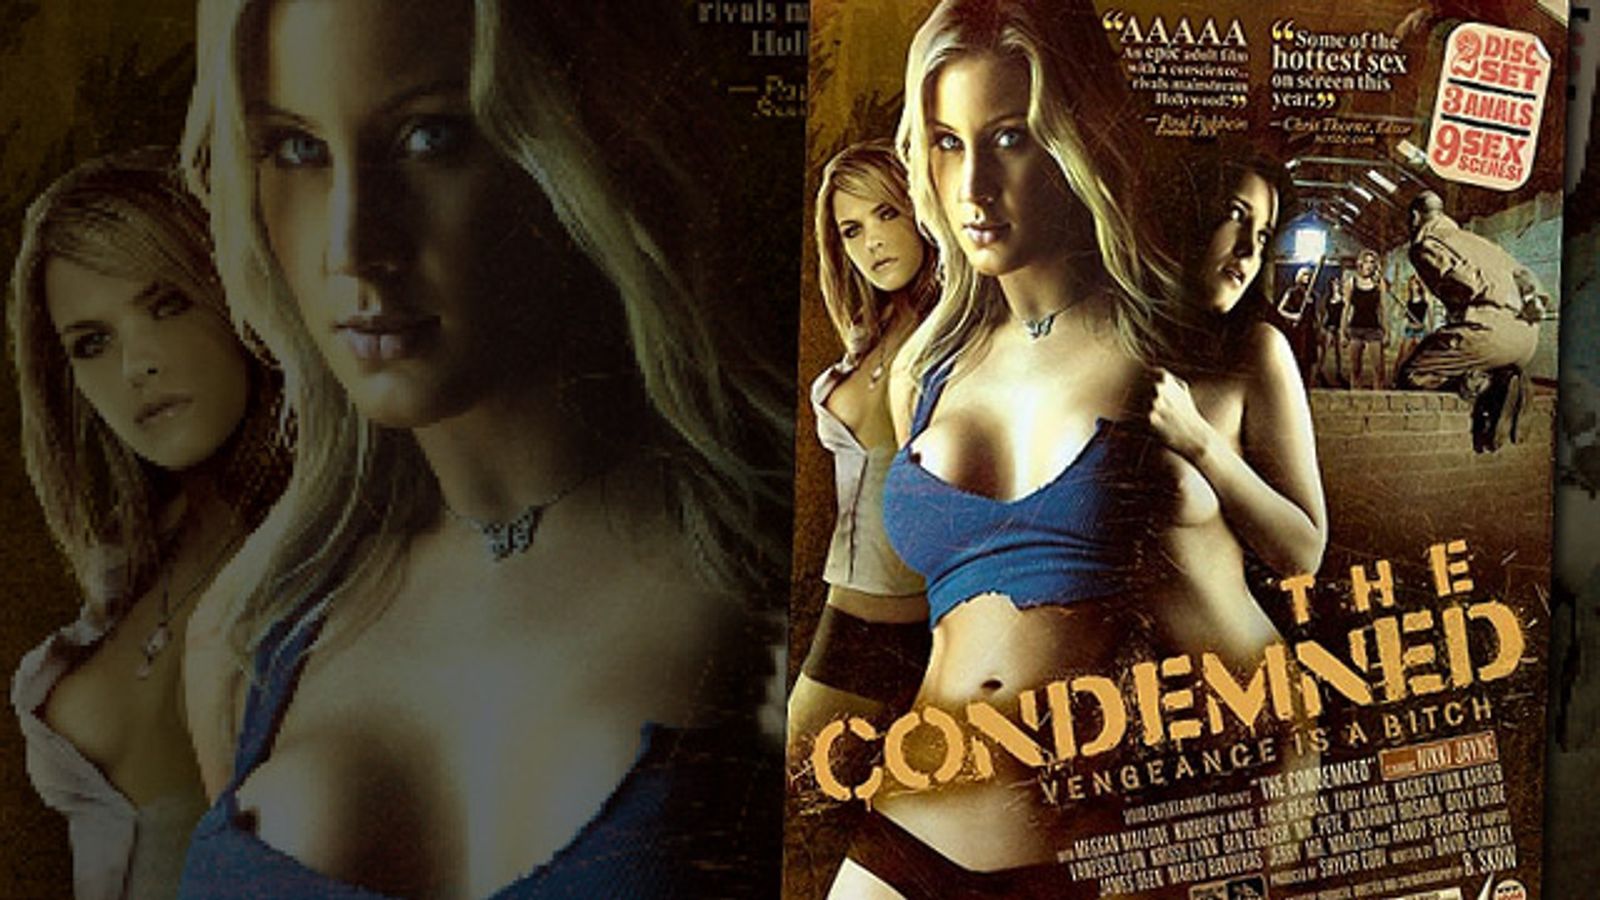 'Event' Feature 'The Condemned' on the Way From Vivid